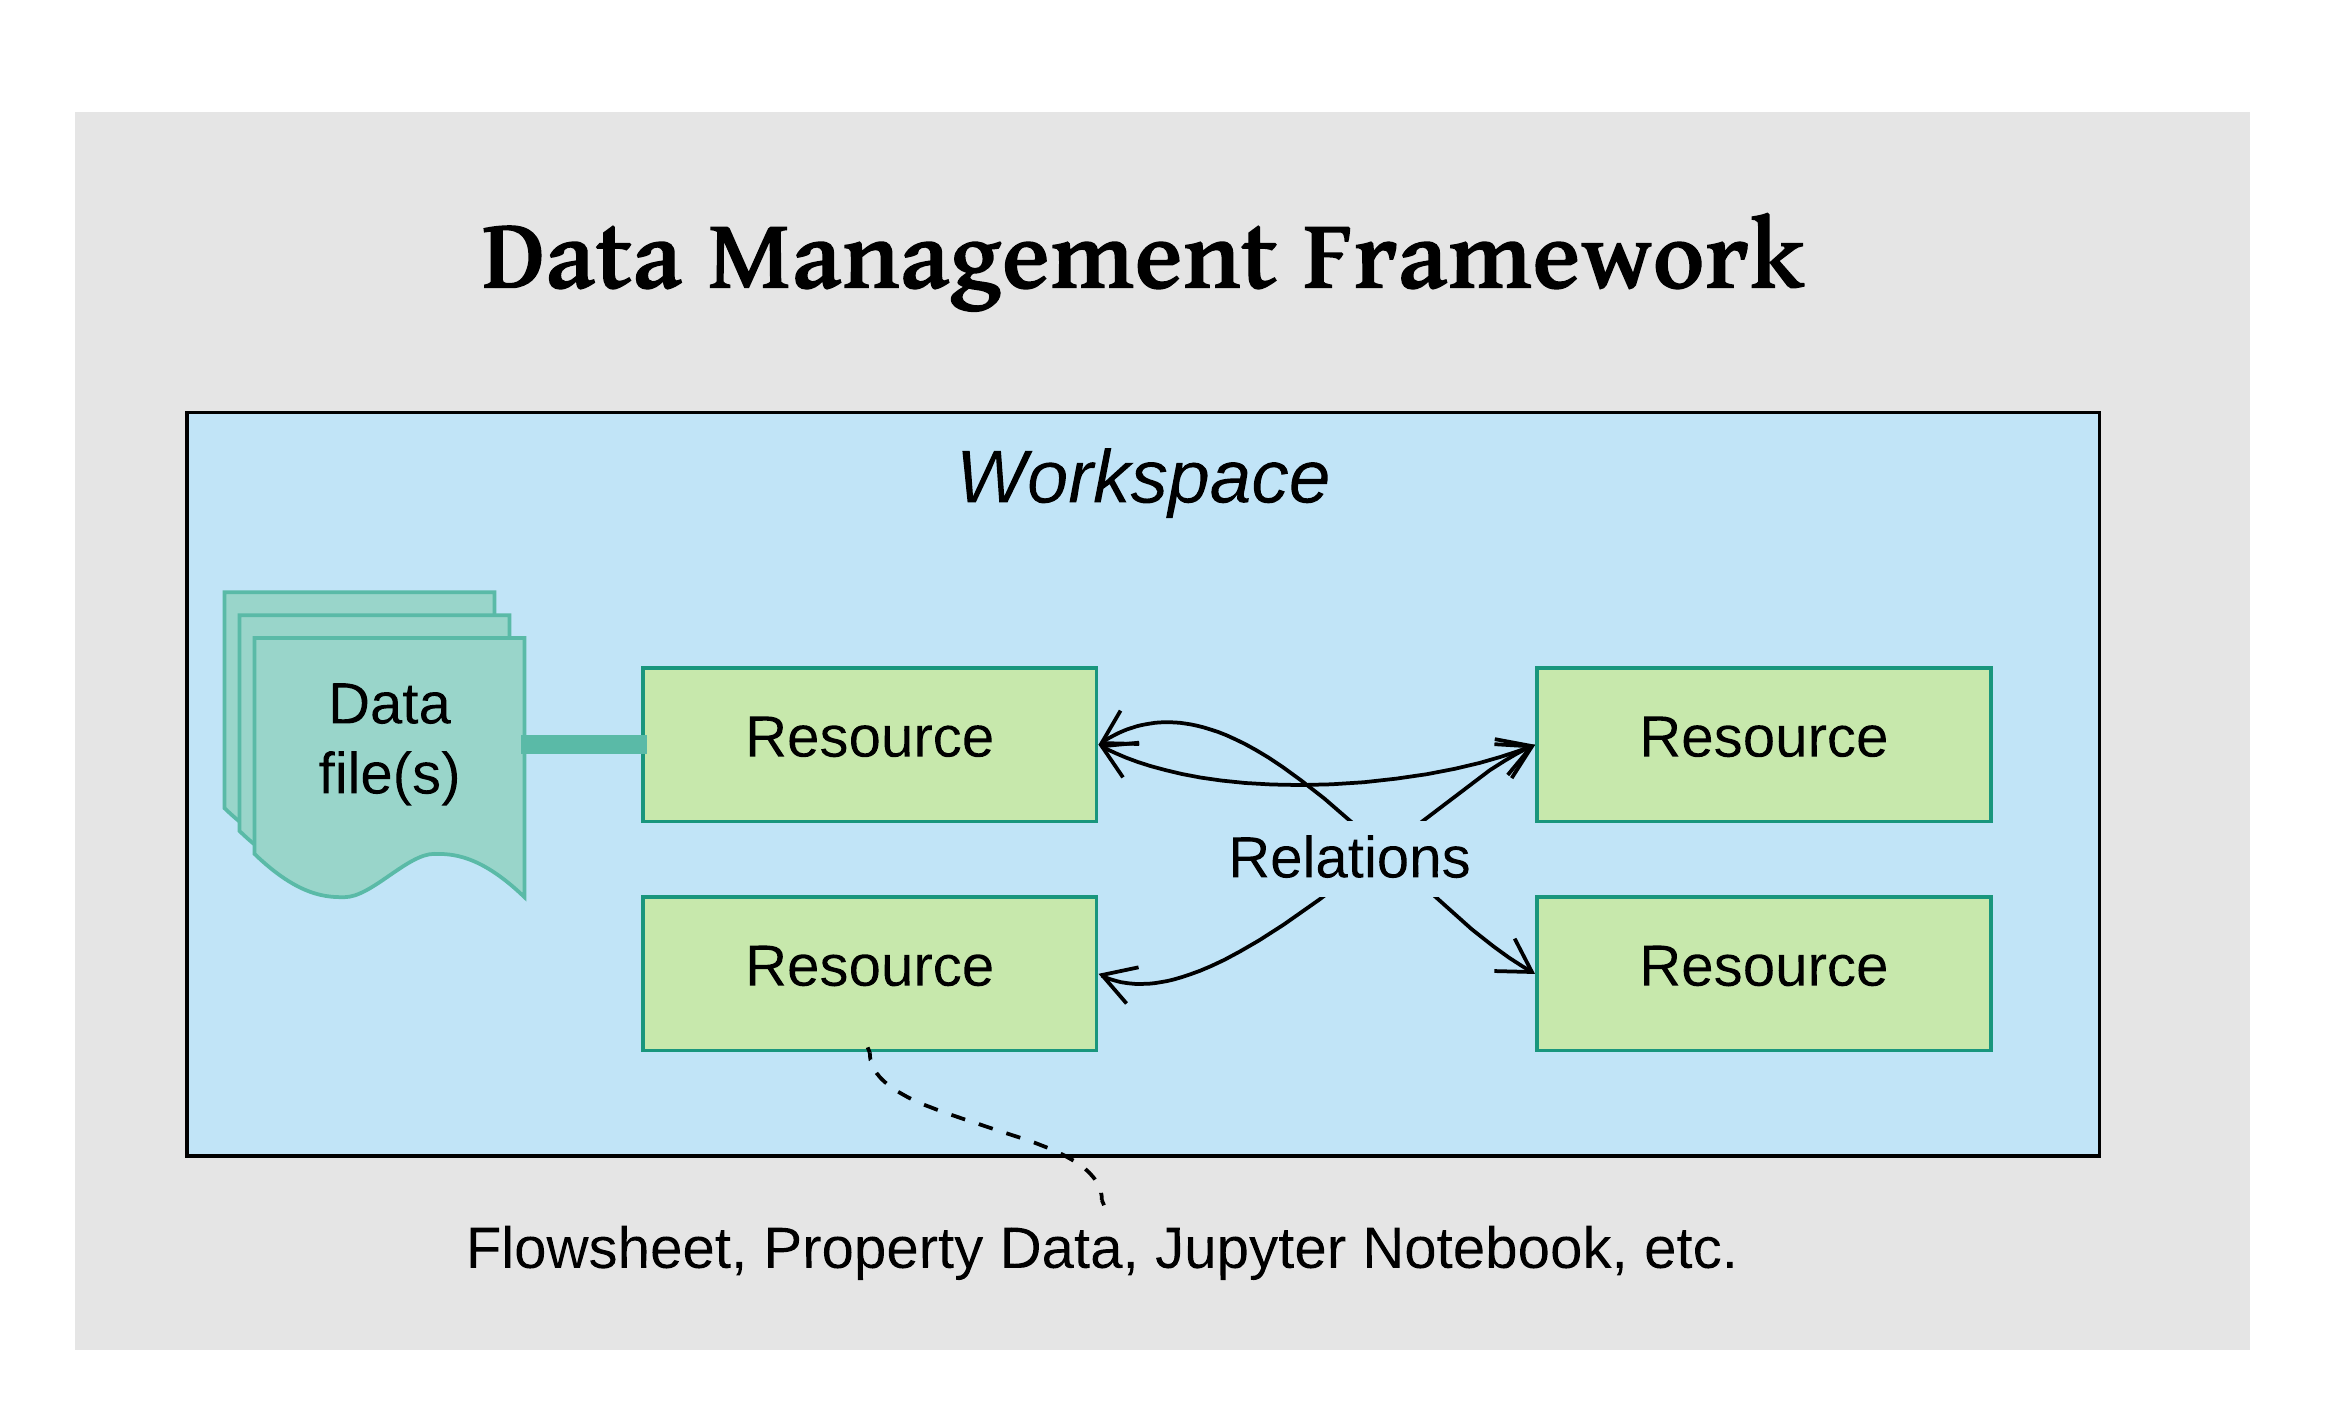 ../../../_images/dmf-workspace-resource.png